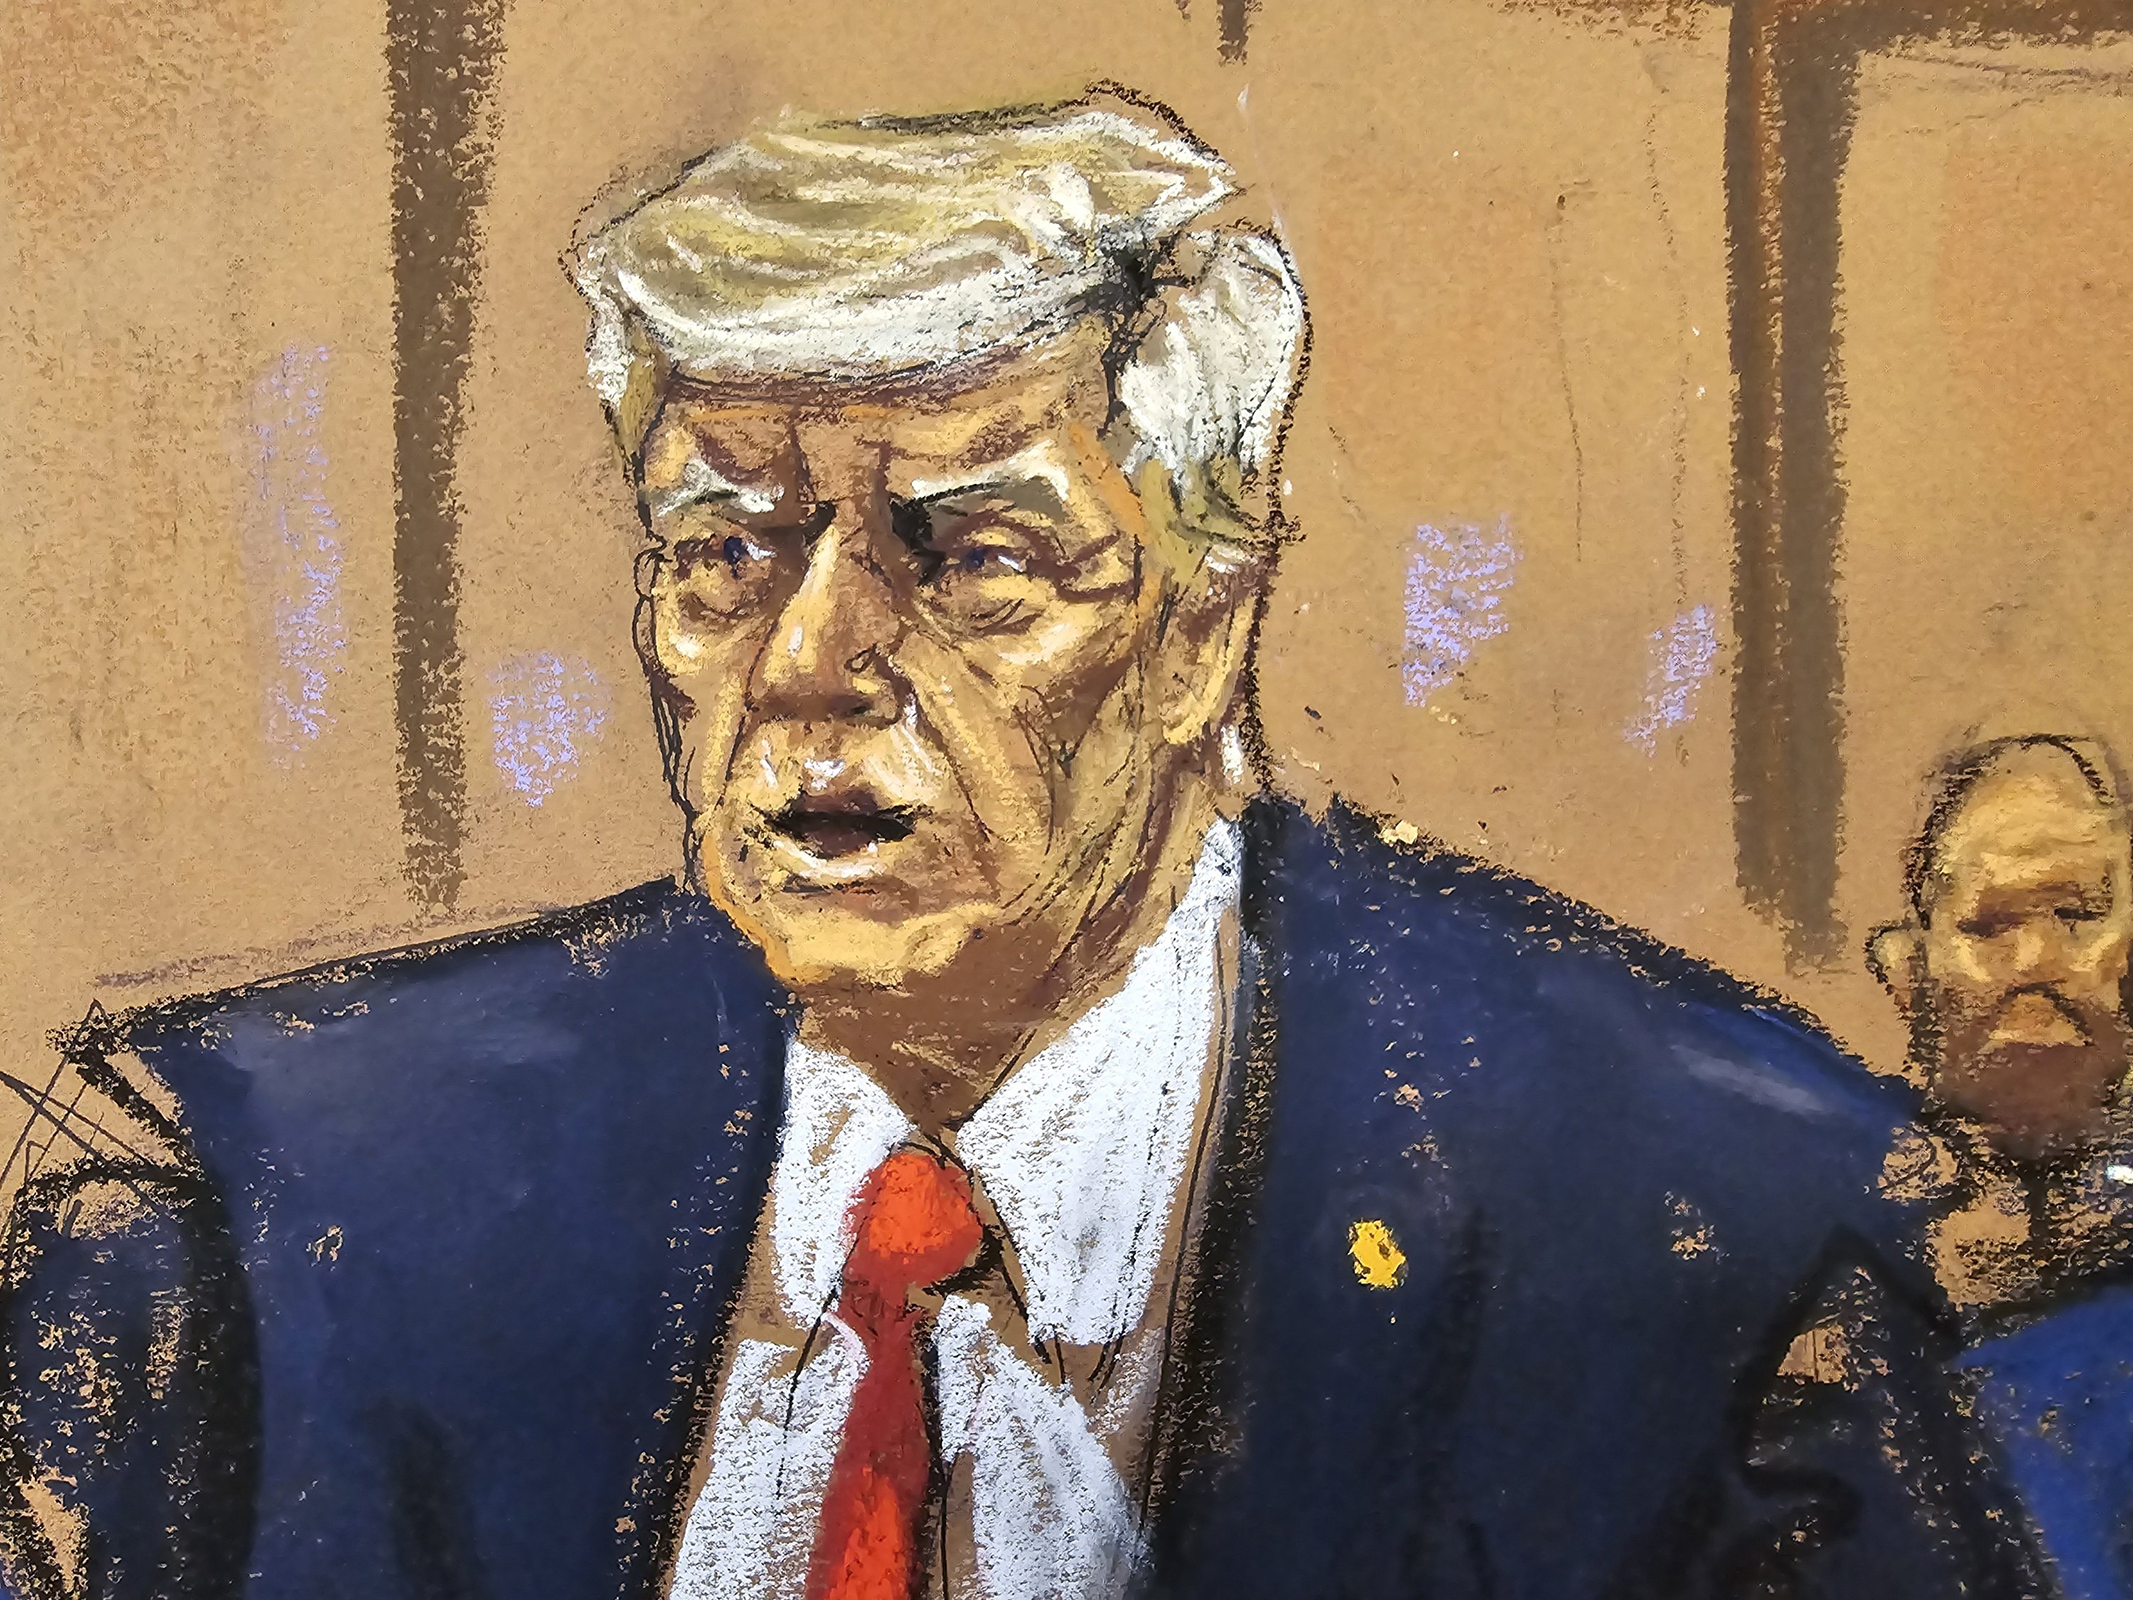 Former President Donald Trump in court on Tuesday.